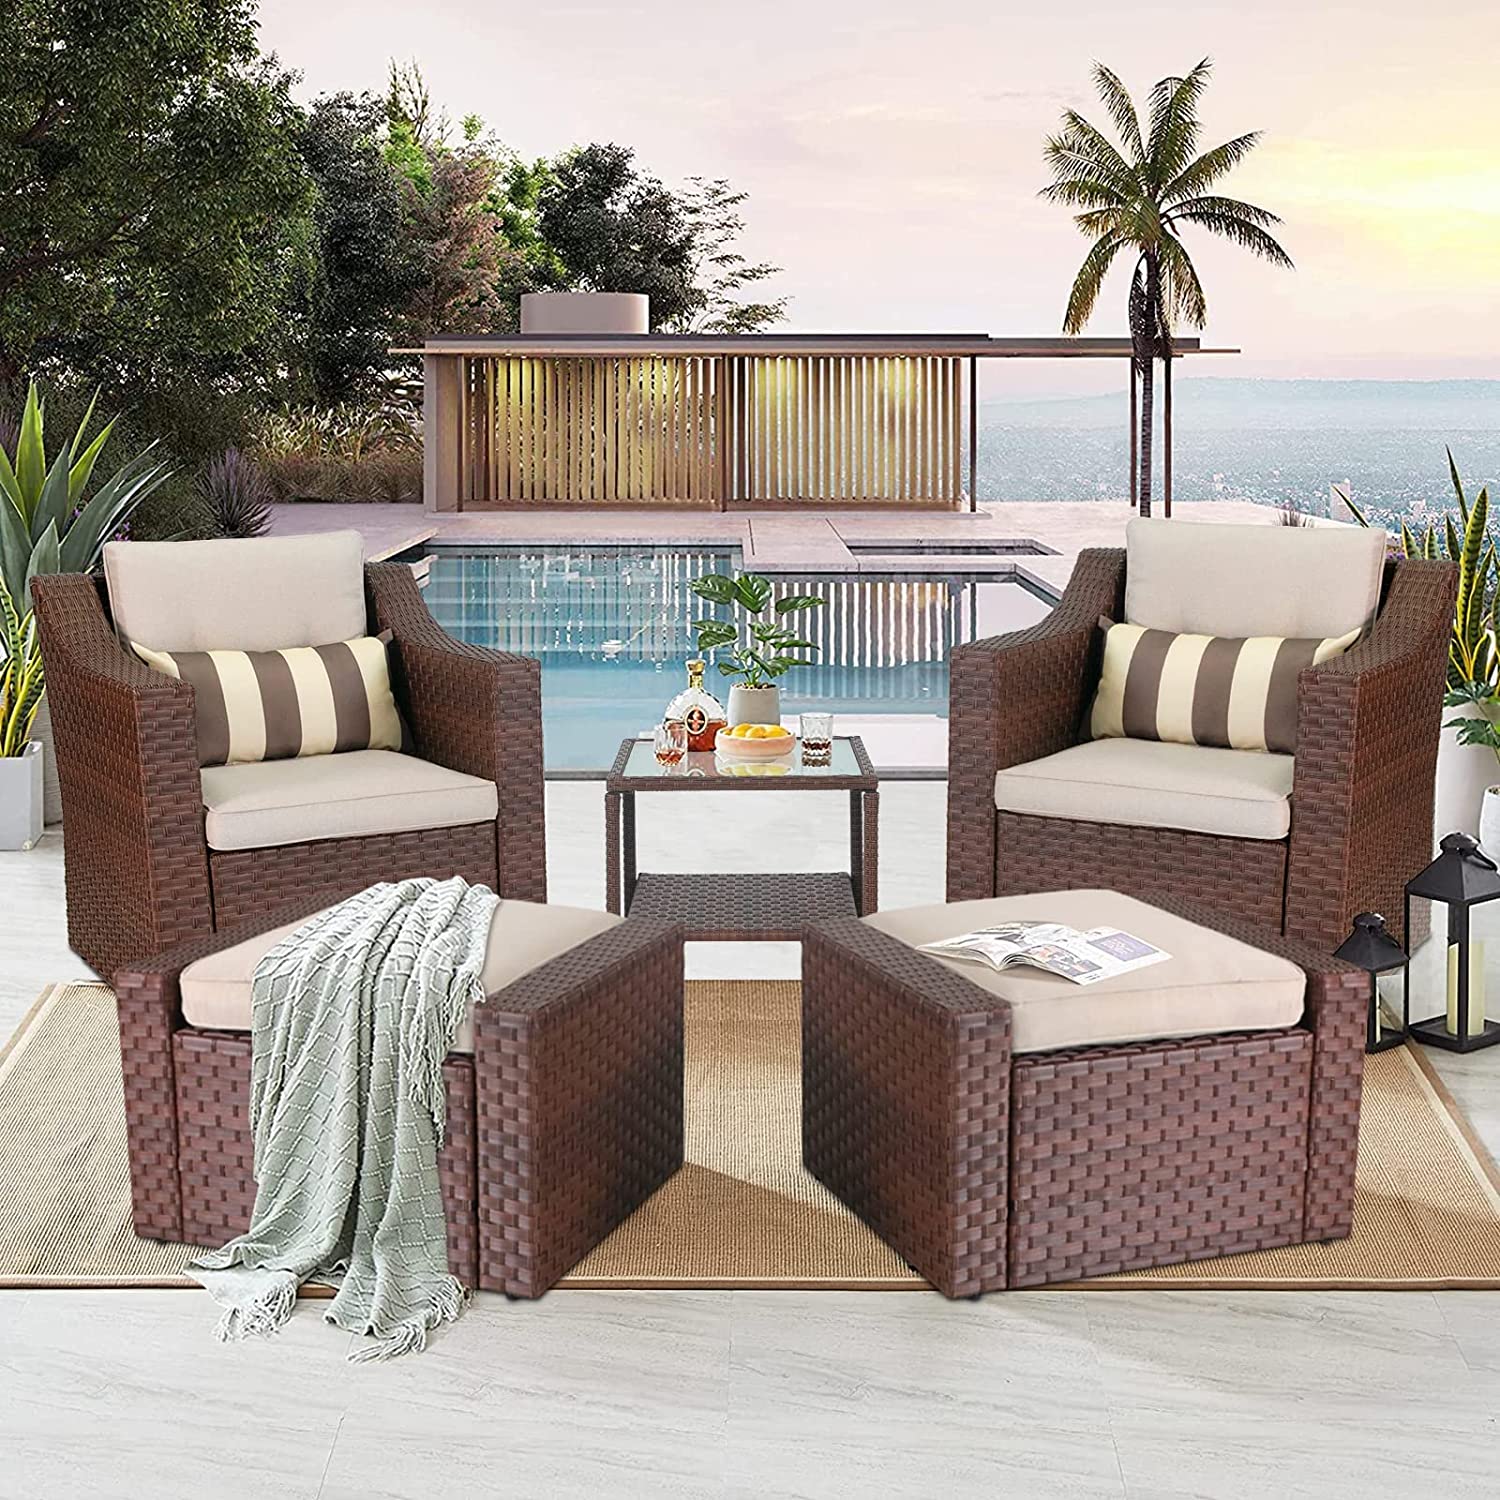 SOLAURA 5-Piece Outdoor Furniture Set Patio Wicker Conversation Set with Lounge Chairs & Ottomans, Brown - image 5 of 7